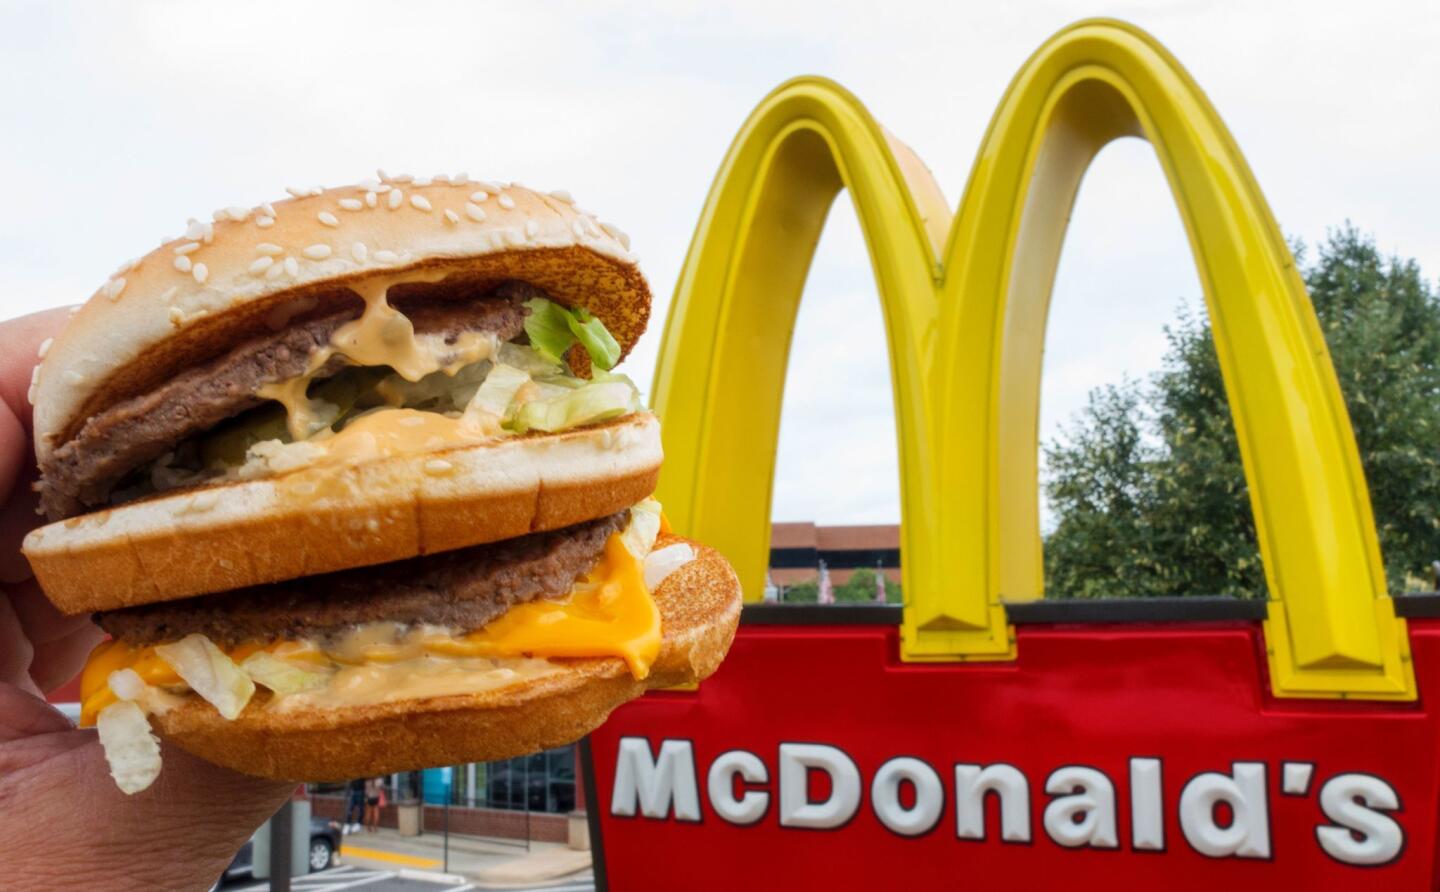 The Big Mac was invented in Pennsylvania